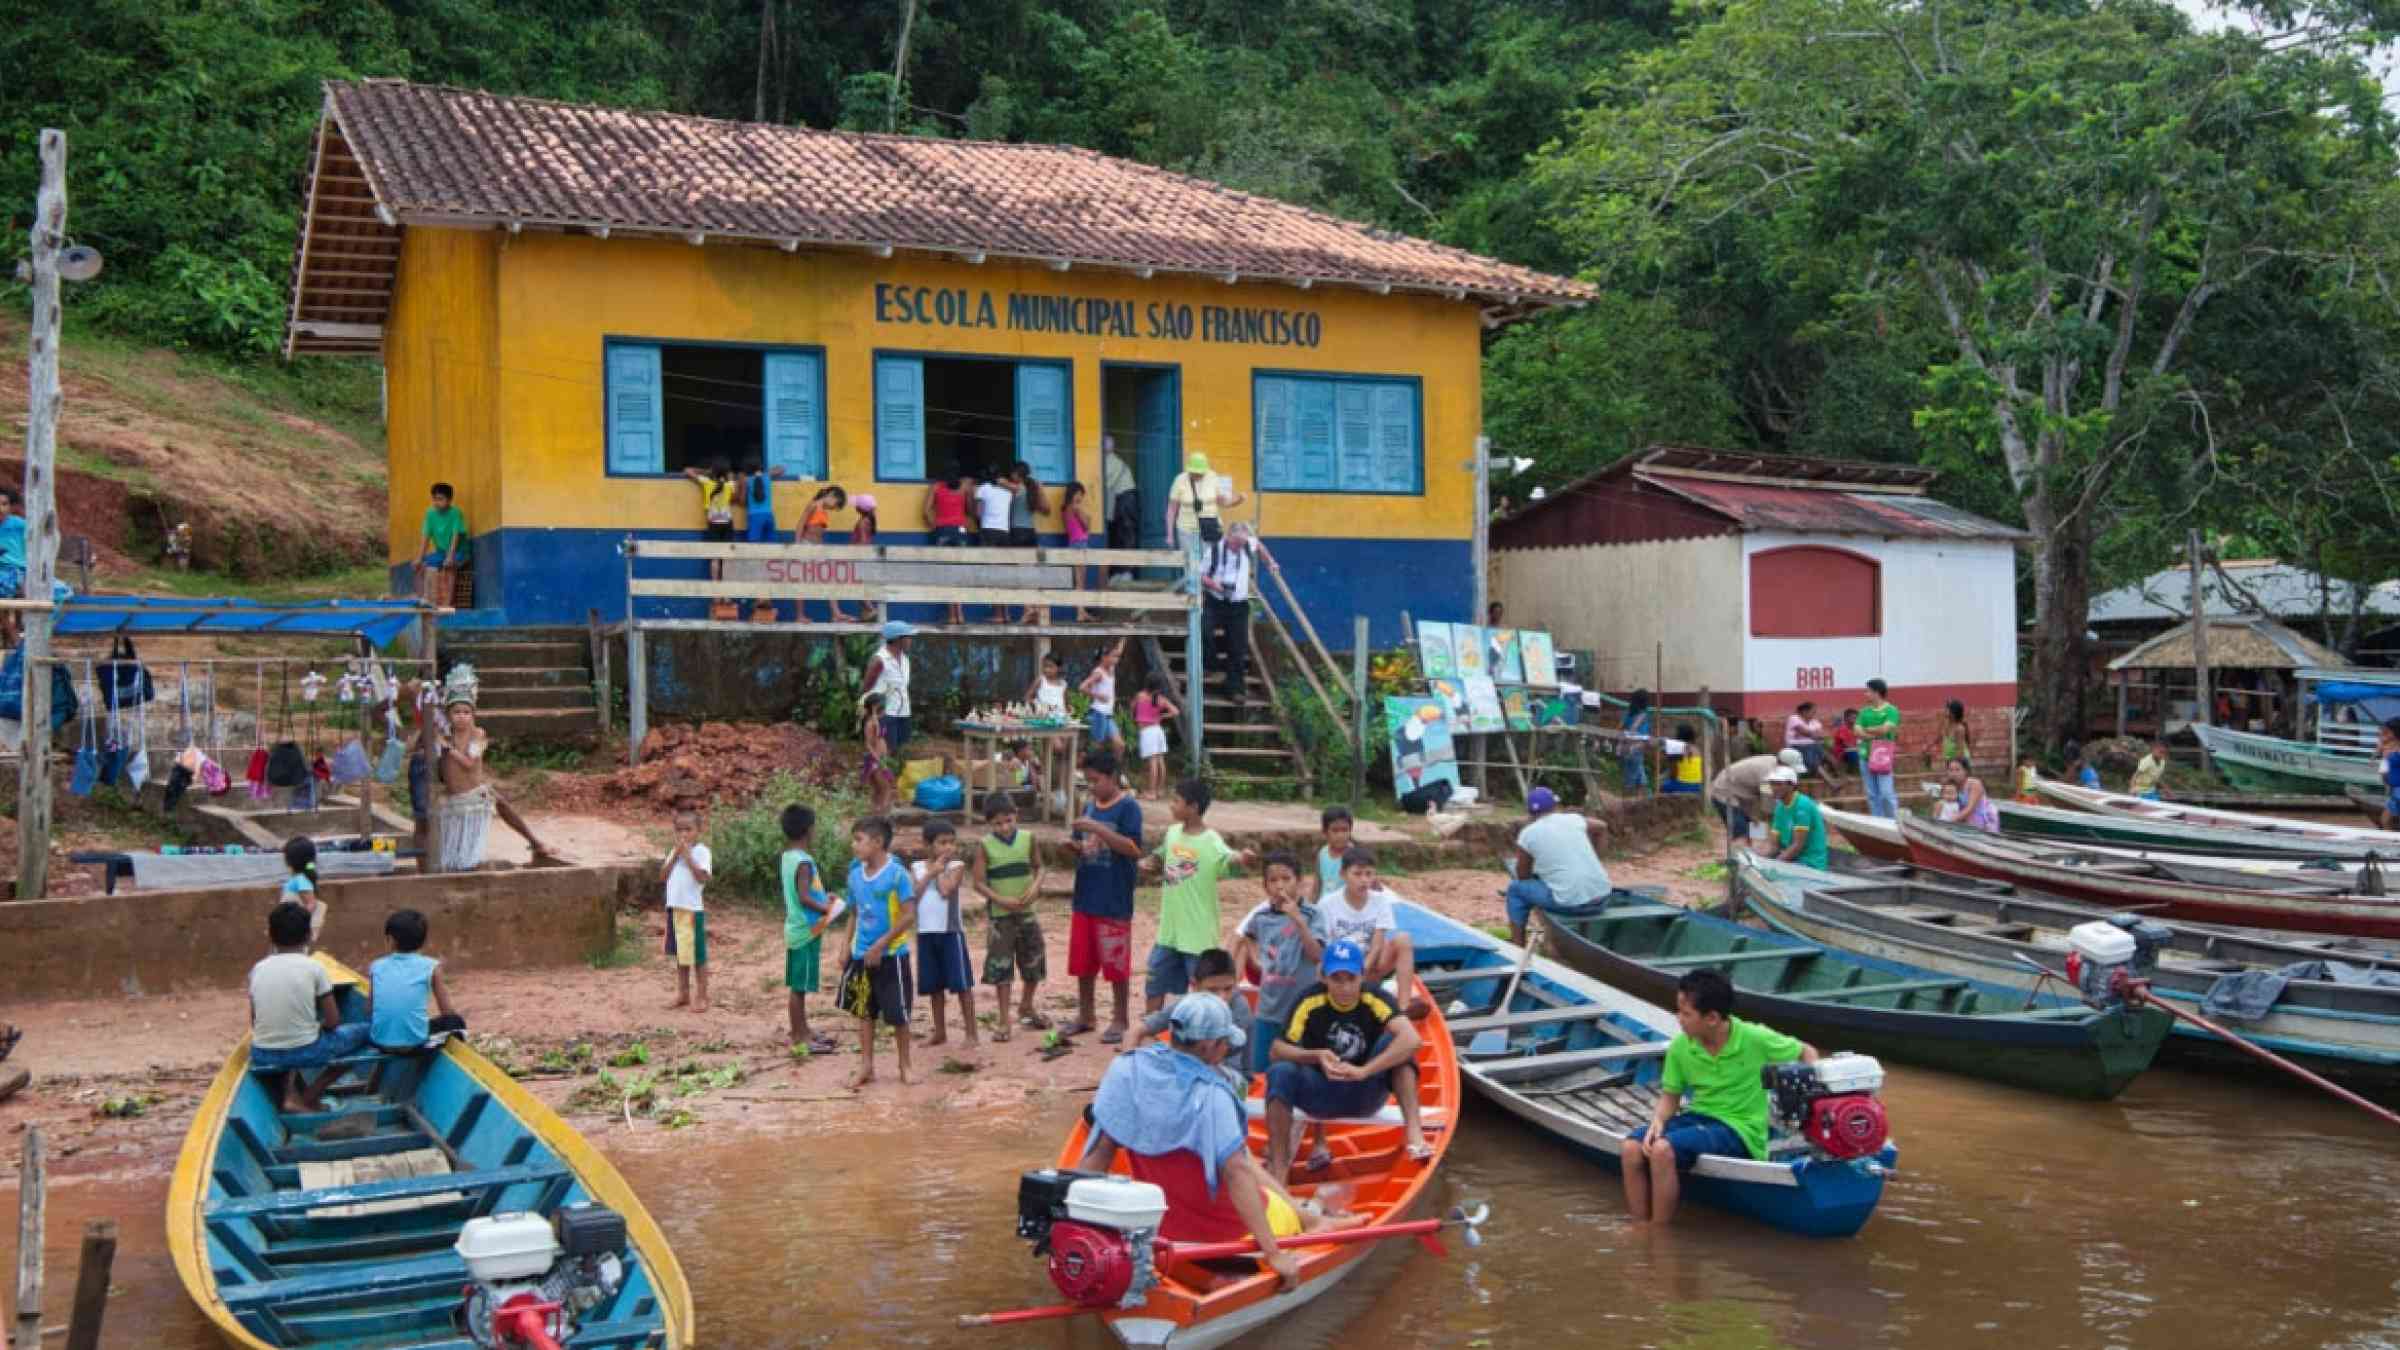 Lots of people and boats and the school at the village of Boca De Valeria on the Amazon River, Amazonas State, Brazil.